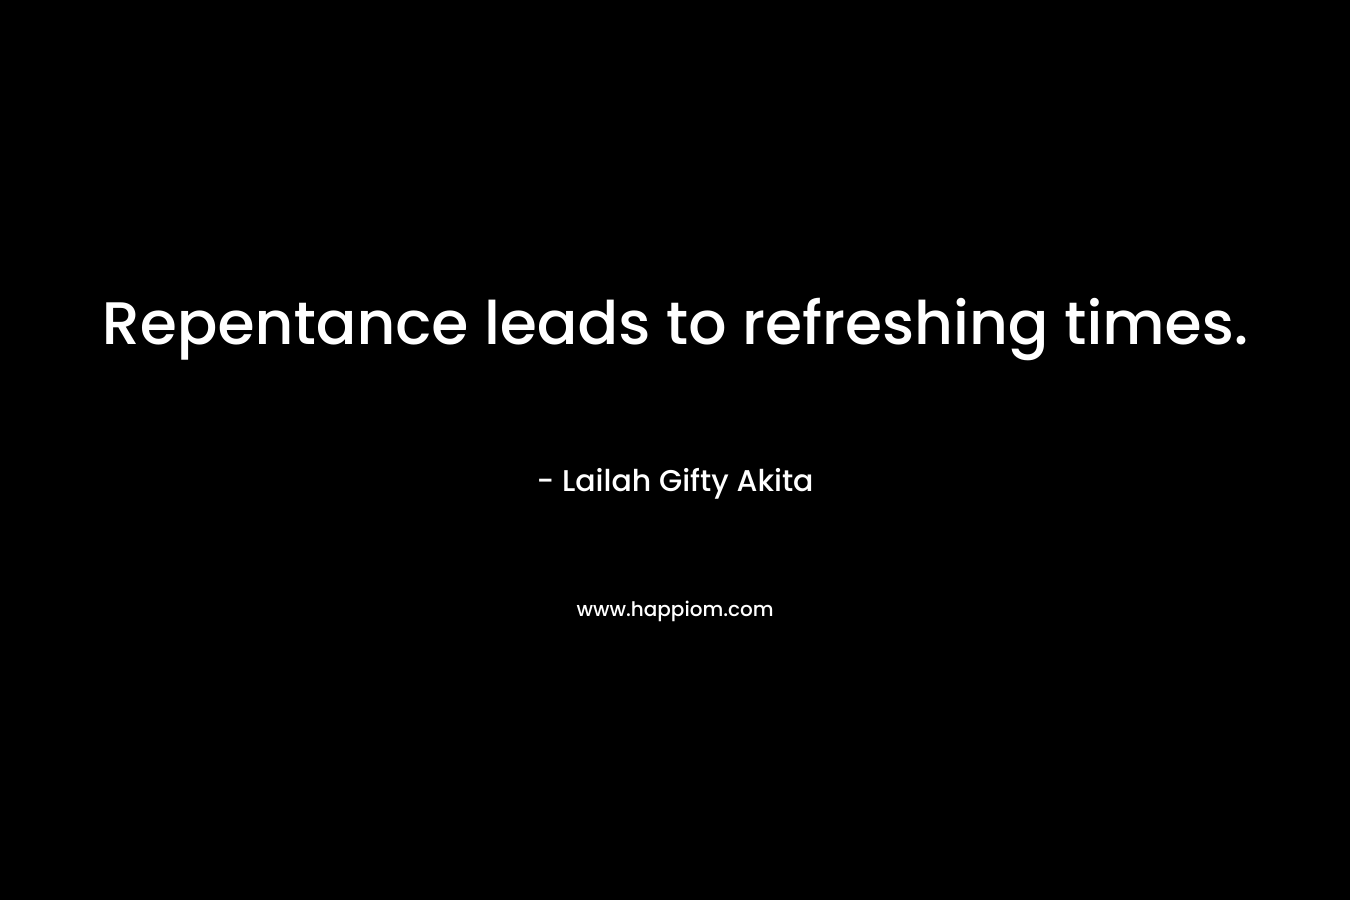 Repentance leads to refreshing times.